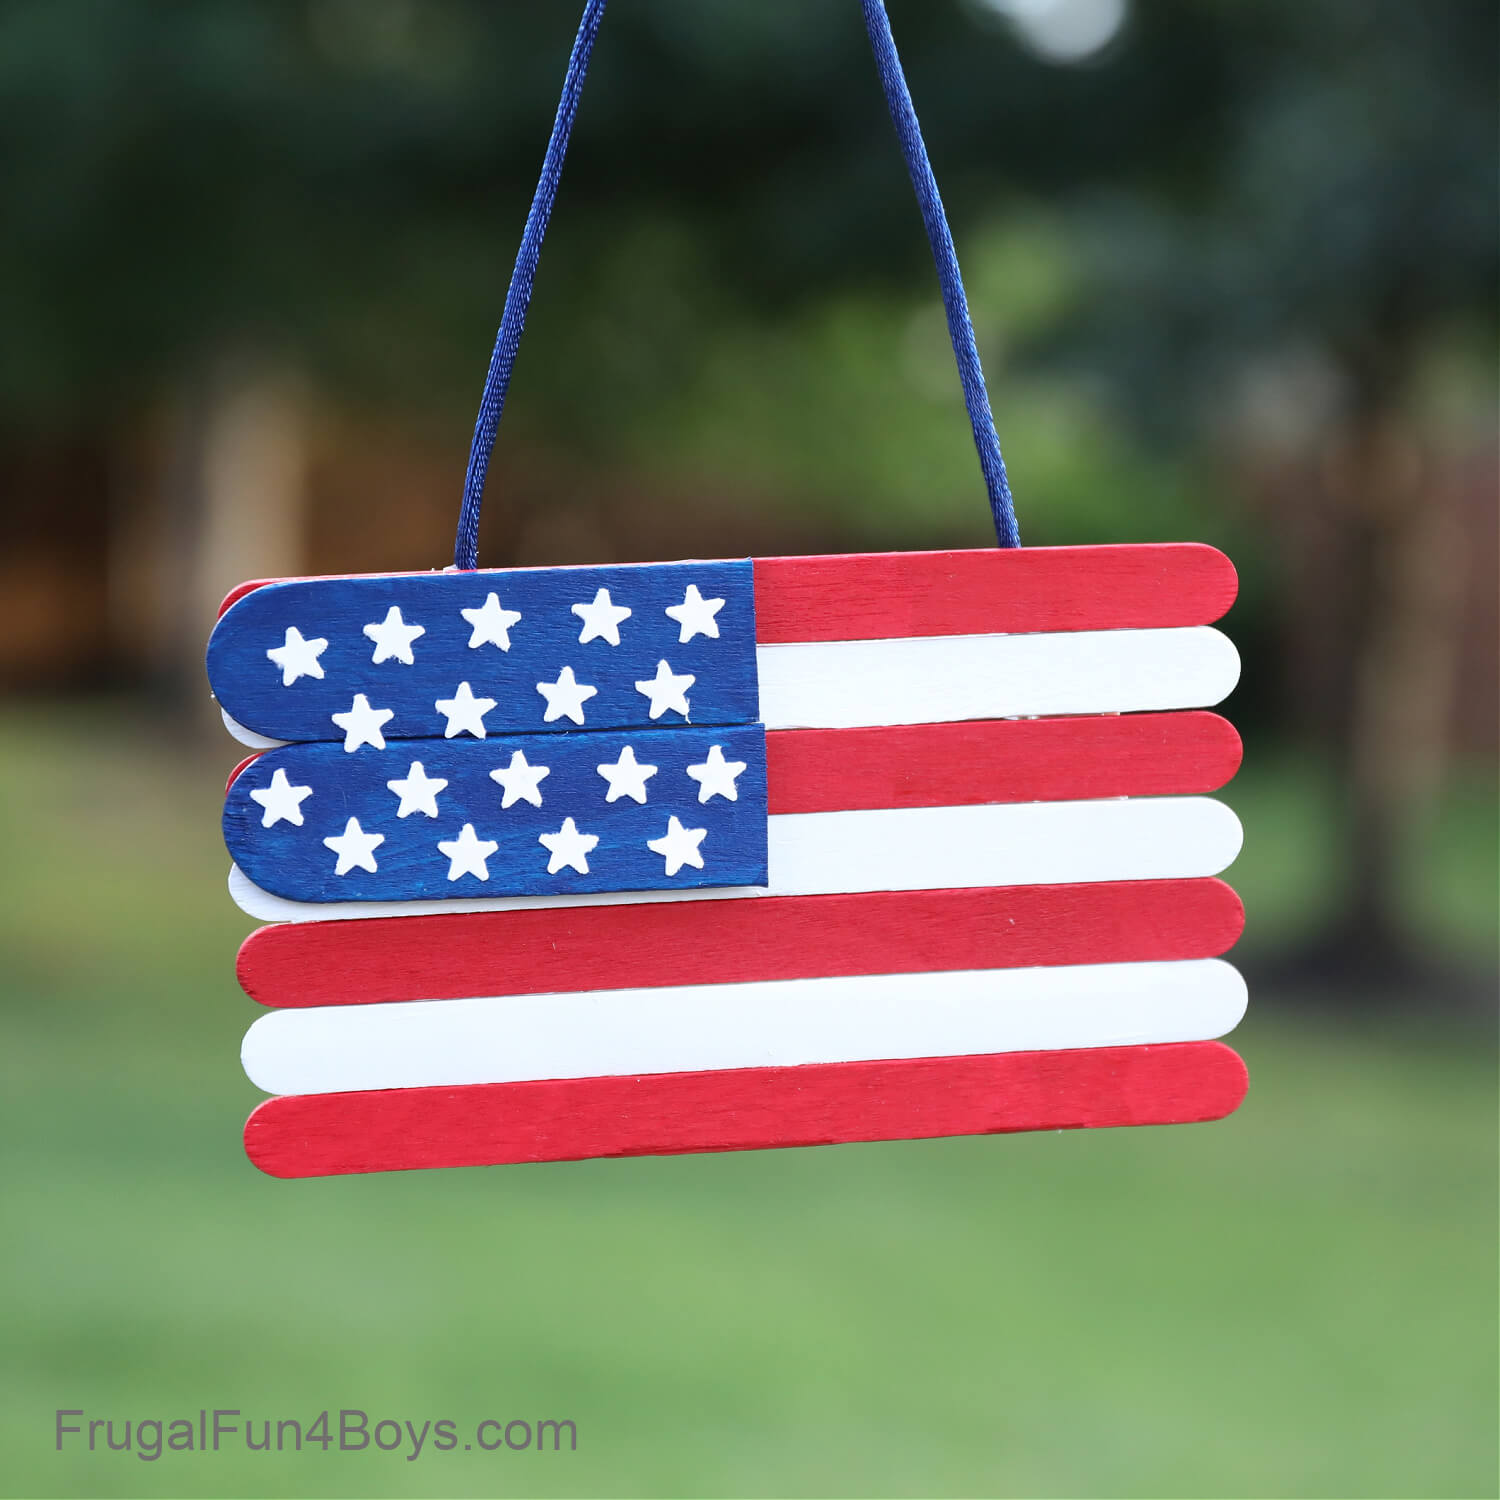 American Flag Craft Made With Popsicle Sticks, Ribbon, Paint & Paper - Making a Flag with Popsicle Sticks: A DIY Project